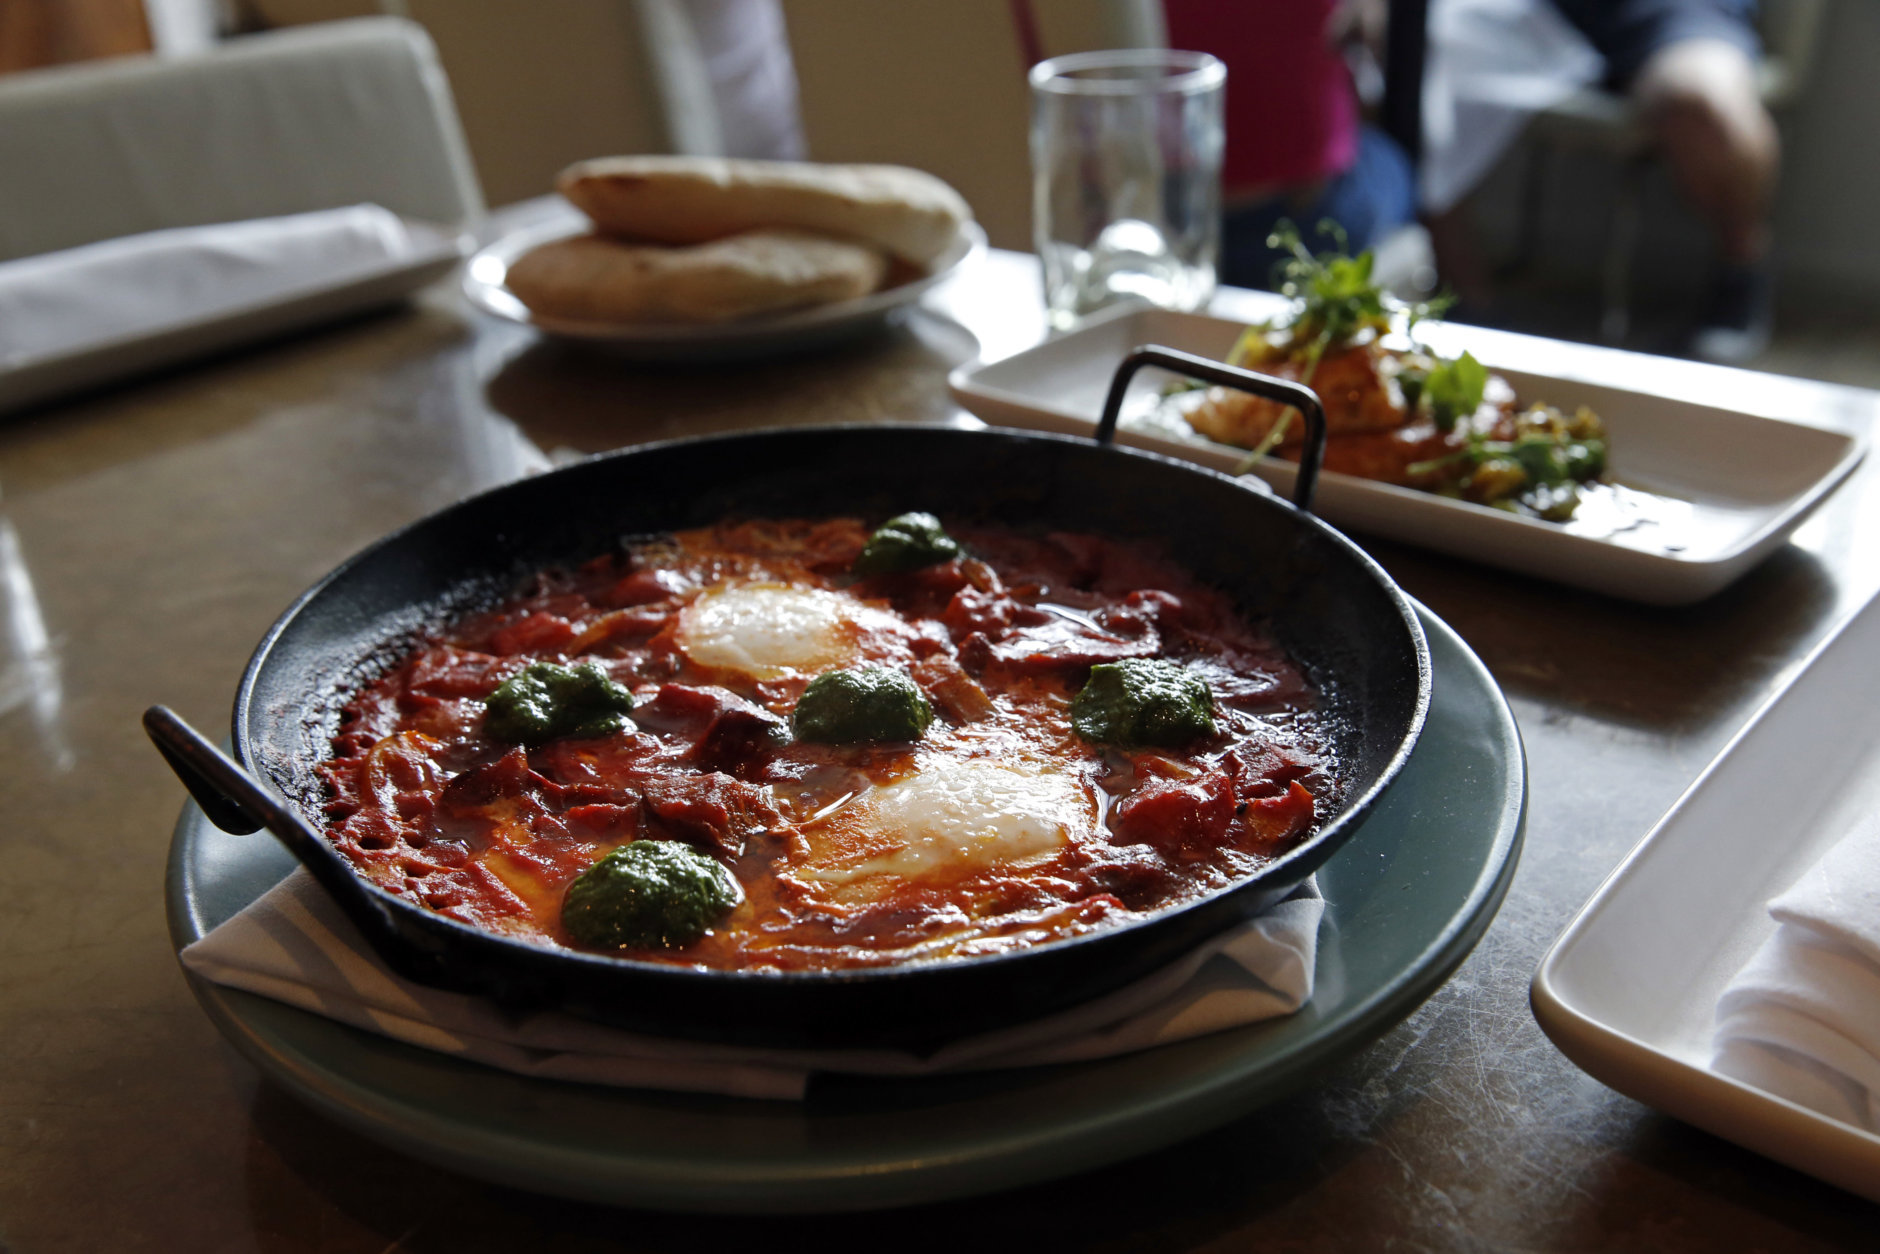 In this May 31, 2016 photo, Shakshouka, which is chermoula, Jerusalem artichokes, spicy chilies, tomato and egg, sits on a table at Shaya Restaurant, in New Orleans. In 2015, Shaya opened his namesake restaurant, a bustling Israeli eatery on chic Magazine Street that the James Beard Foundation in May named the Best New Restaurant in the U.S. (AP Photo/Gerald Herbert)